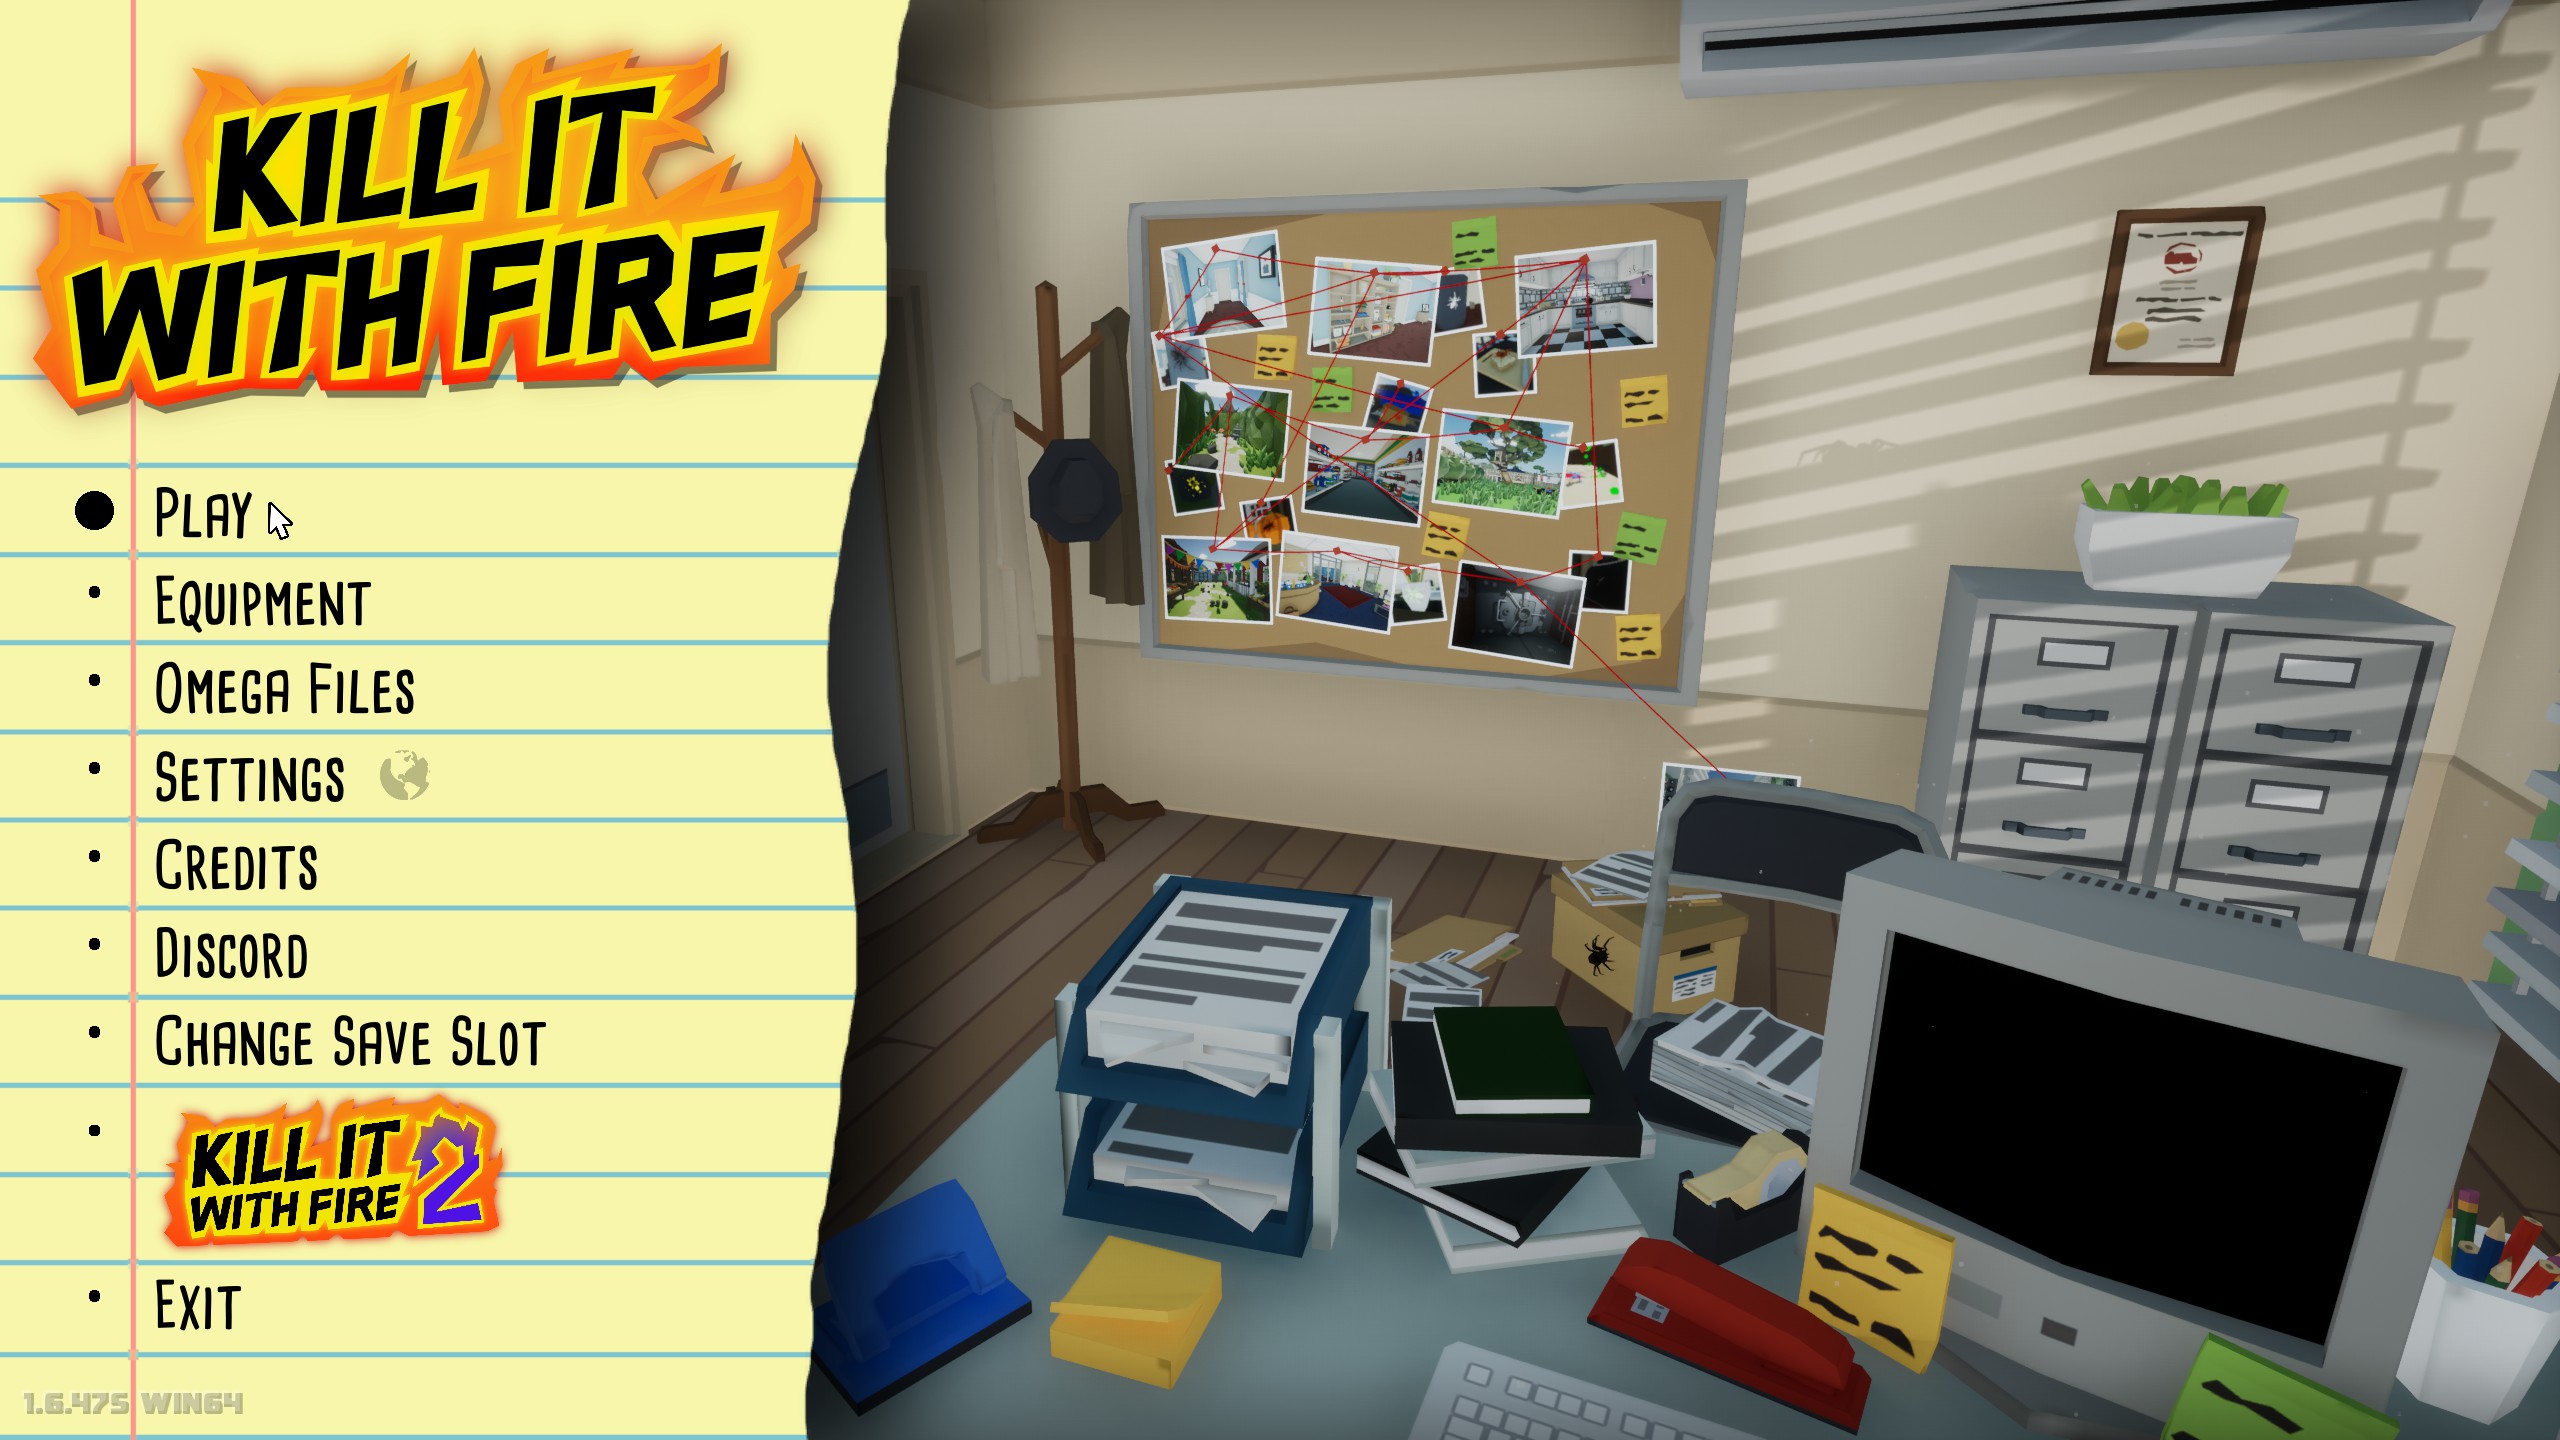 An image of the title menu for the game 'Kill it with Fire'